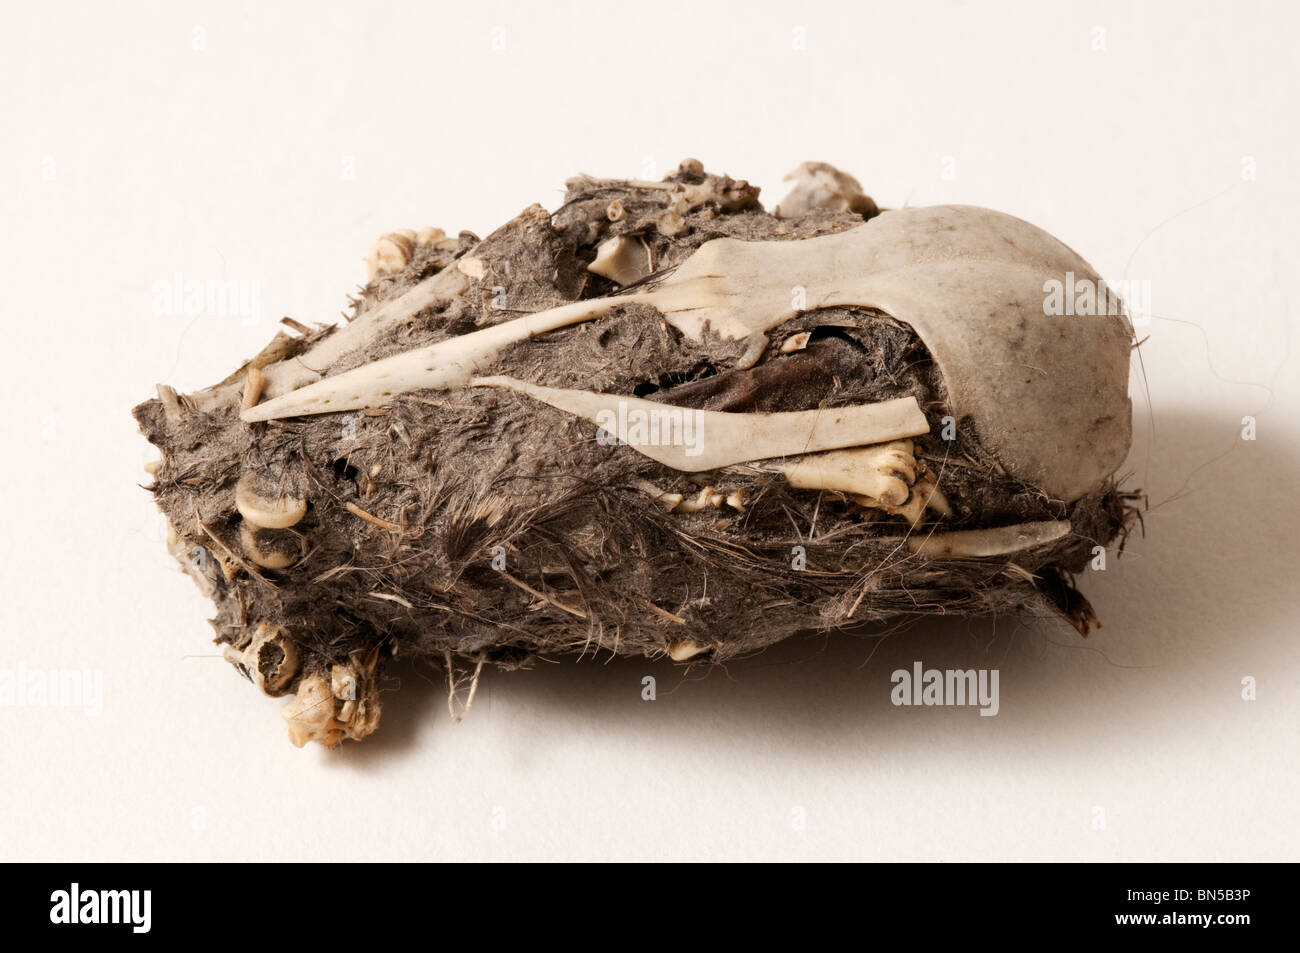 An owl pellet containing the skull and small bones of prey. Stock Photo